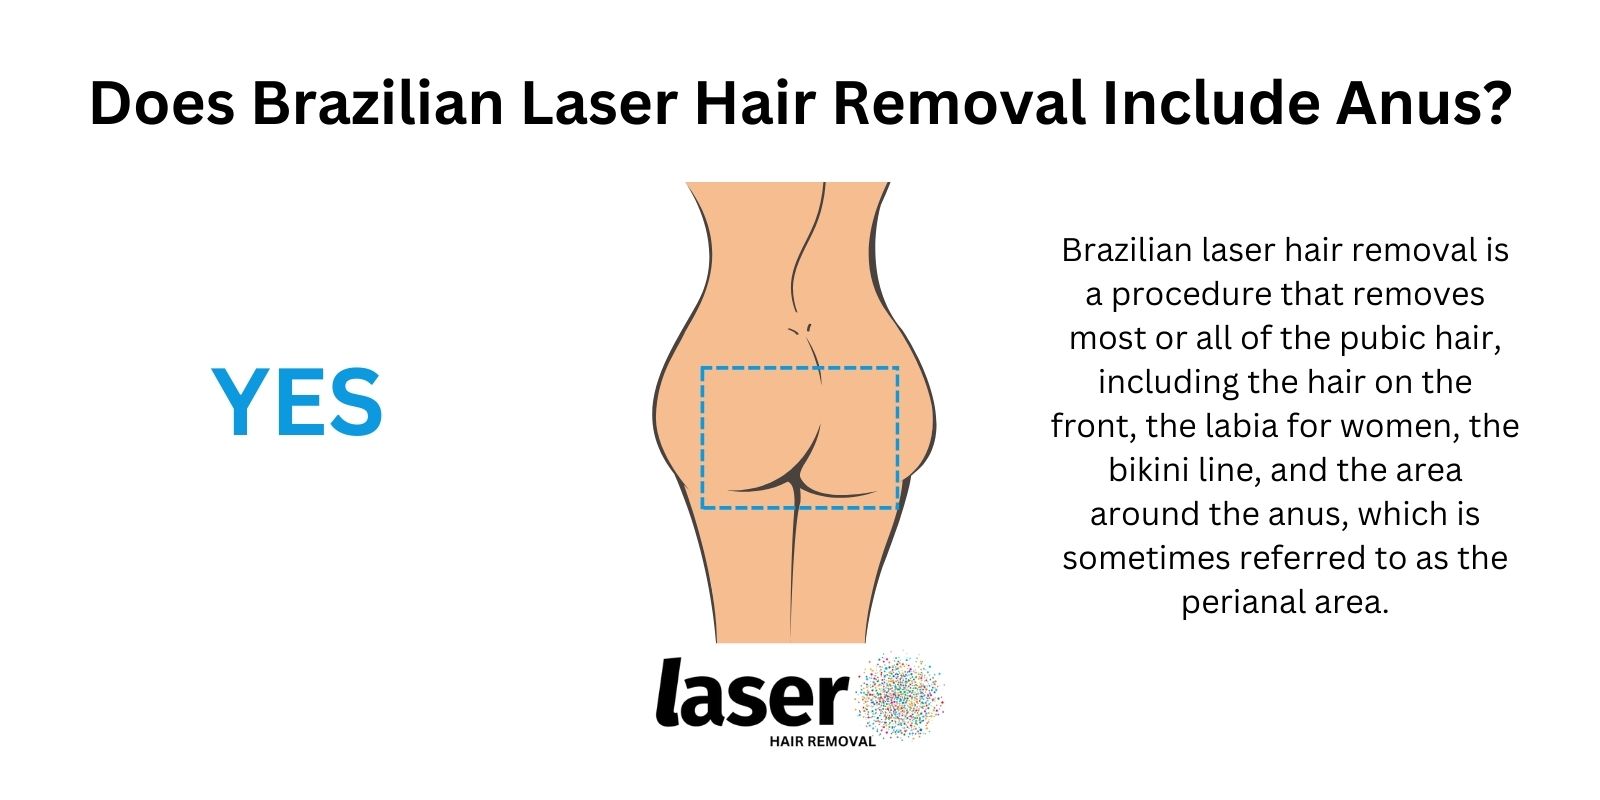 Does Brazilian Laser Hair Removal Include Anus?